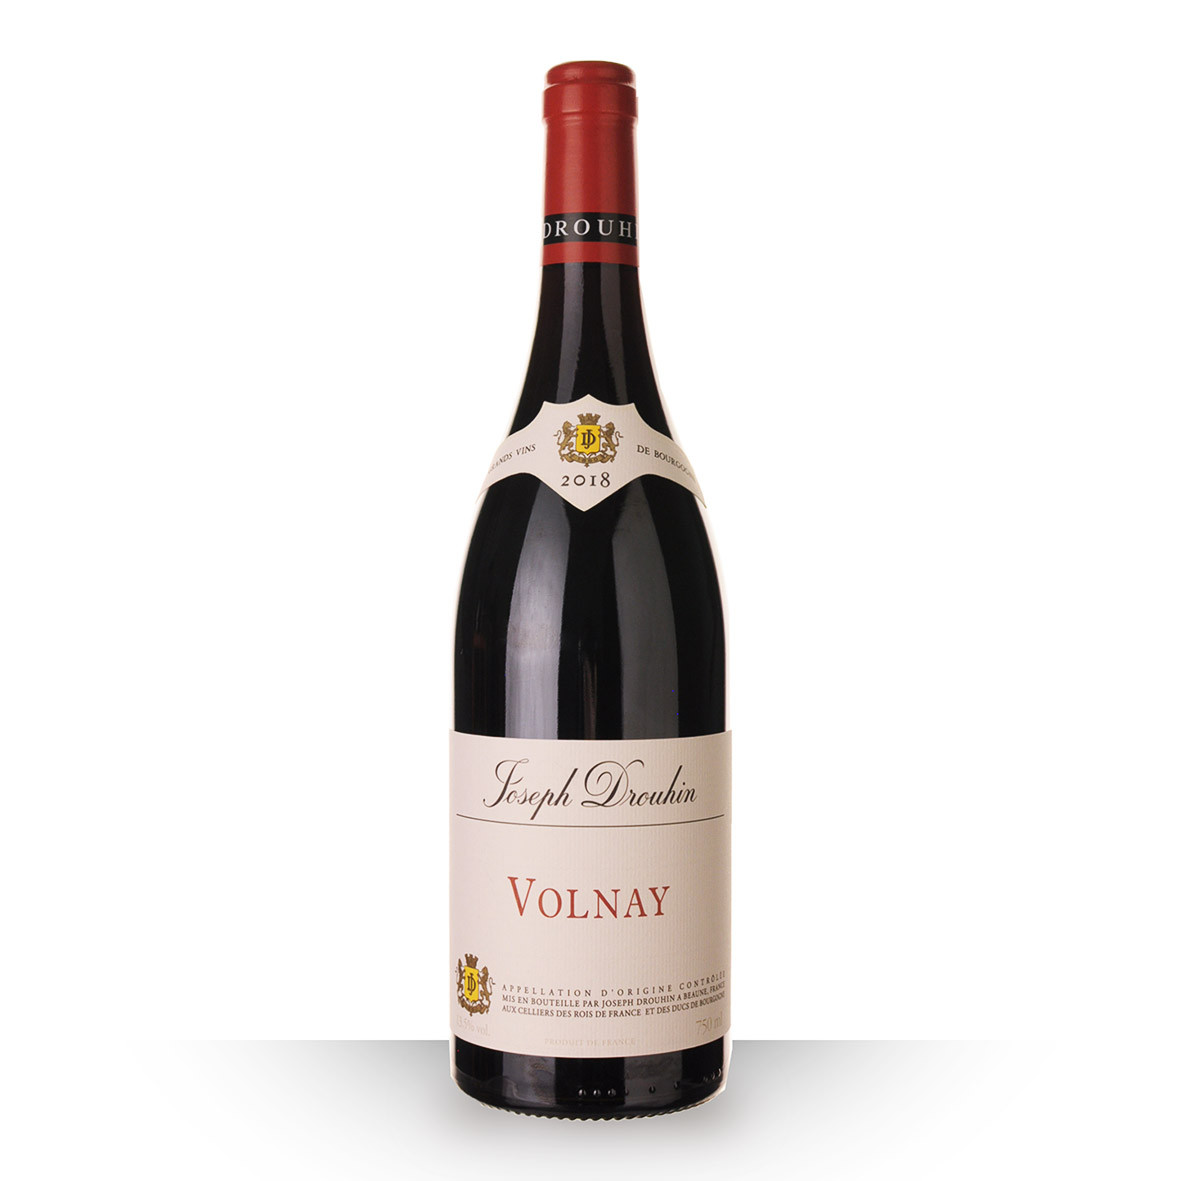 Joseph Drouhin Volnay Rouge 2018 75cl www.odyssee-vins.com